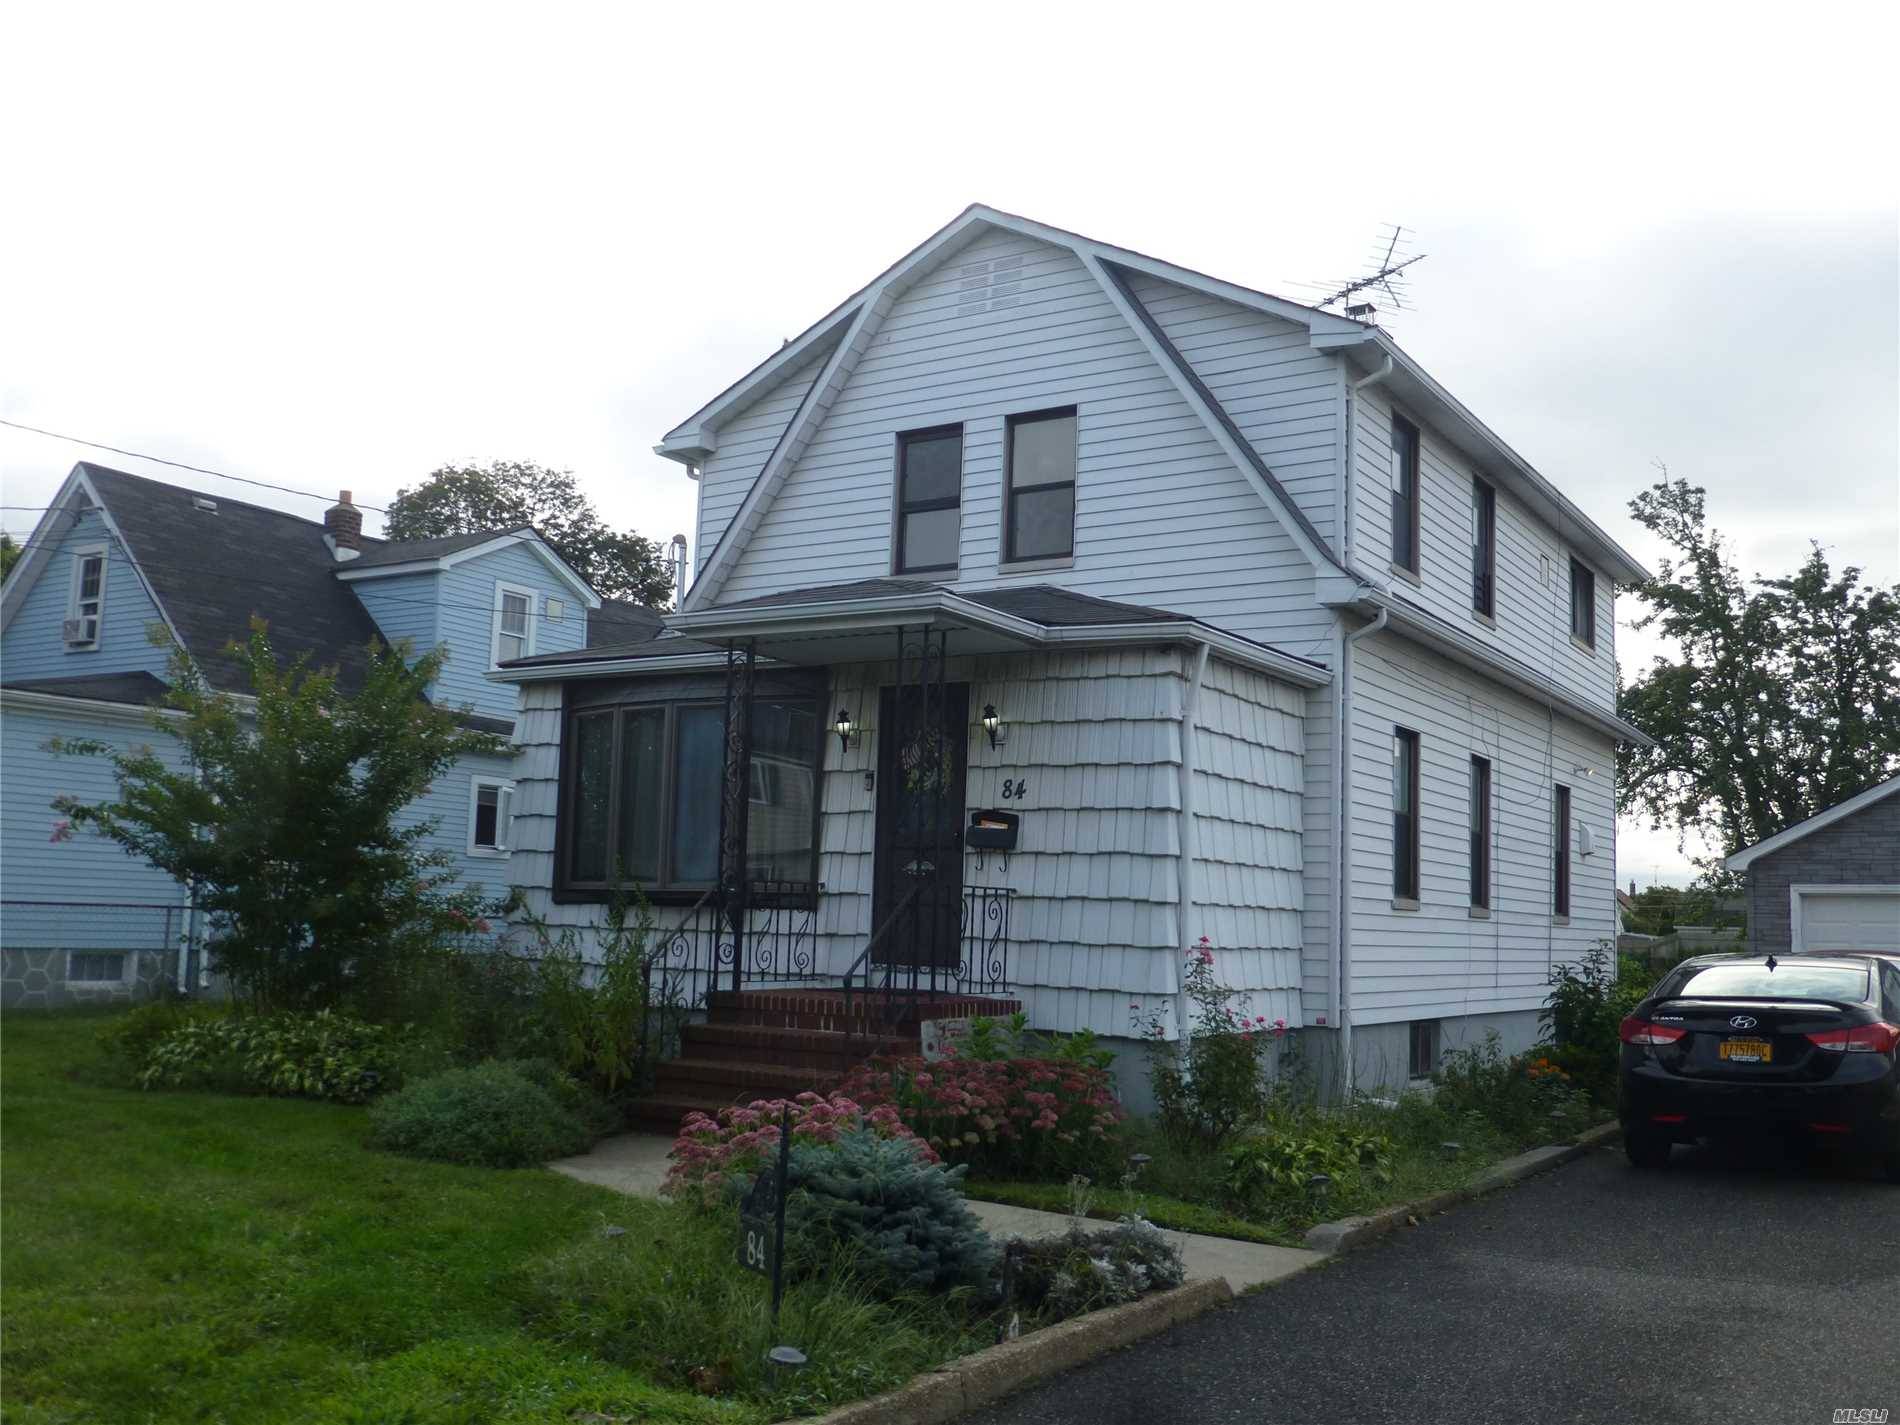 Whole House Rental With 9 Rooms, 4 Bedrooms, 2 Full Bathrooms W/Tubs, Full Basement W/Washer&Dryer, Central Air!